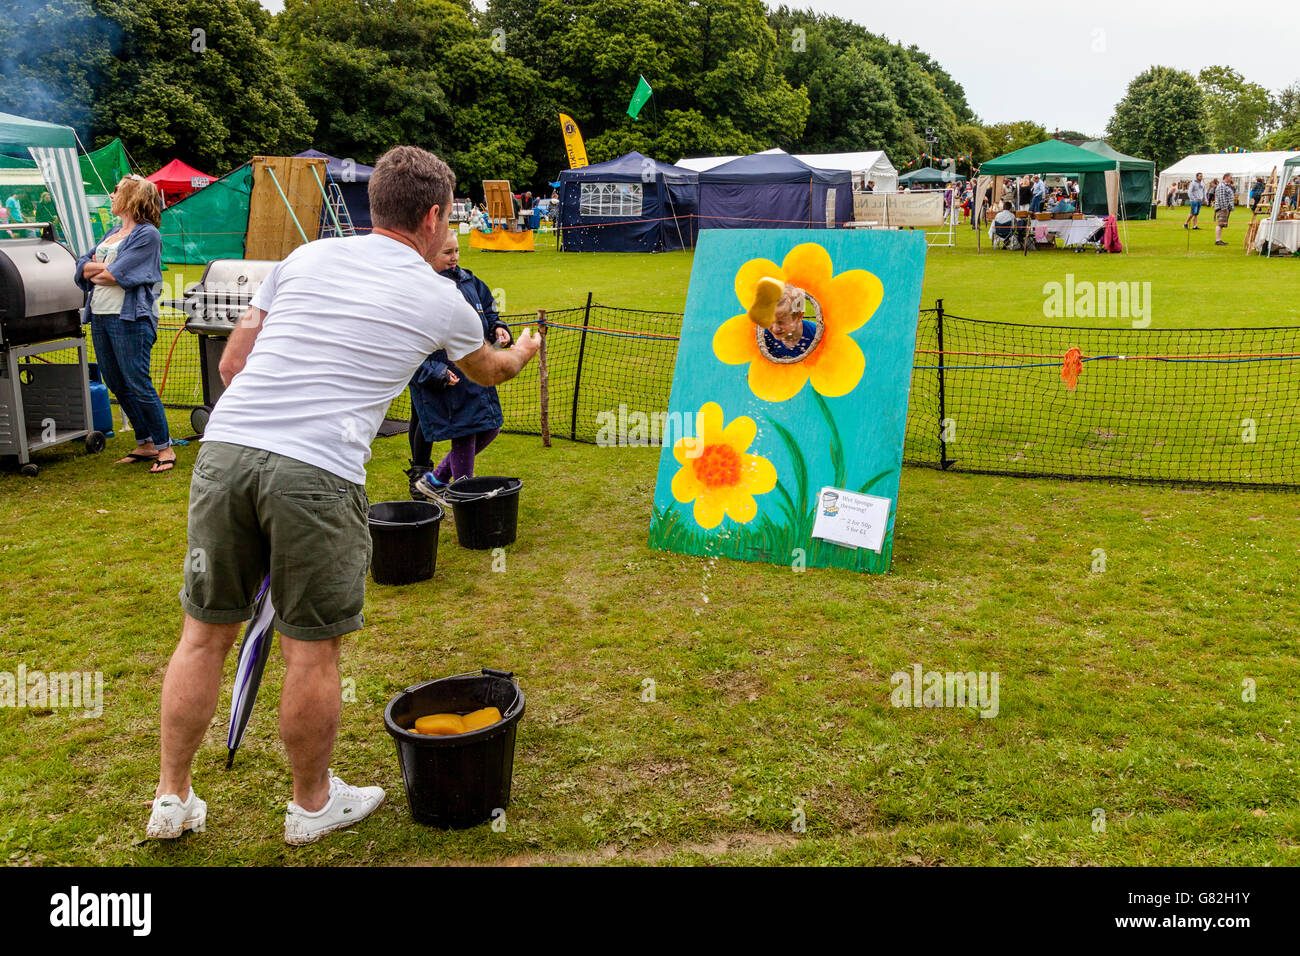 Wet Sponge Throwing At The Annual Village Fete In Nutley, East Sussex, UK Stock Photo